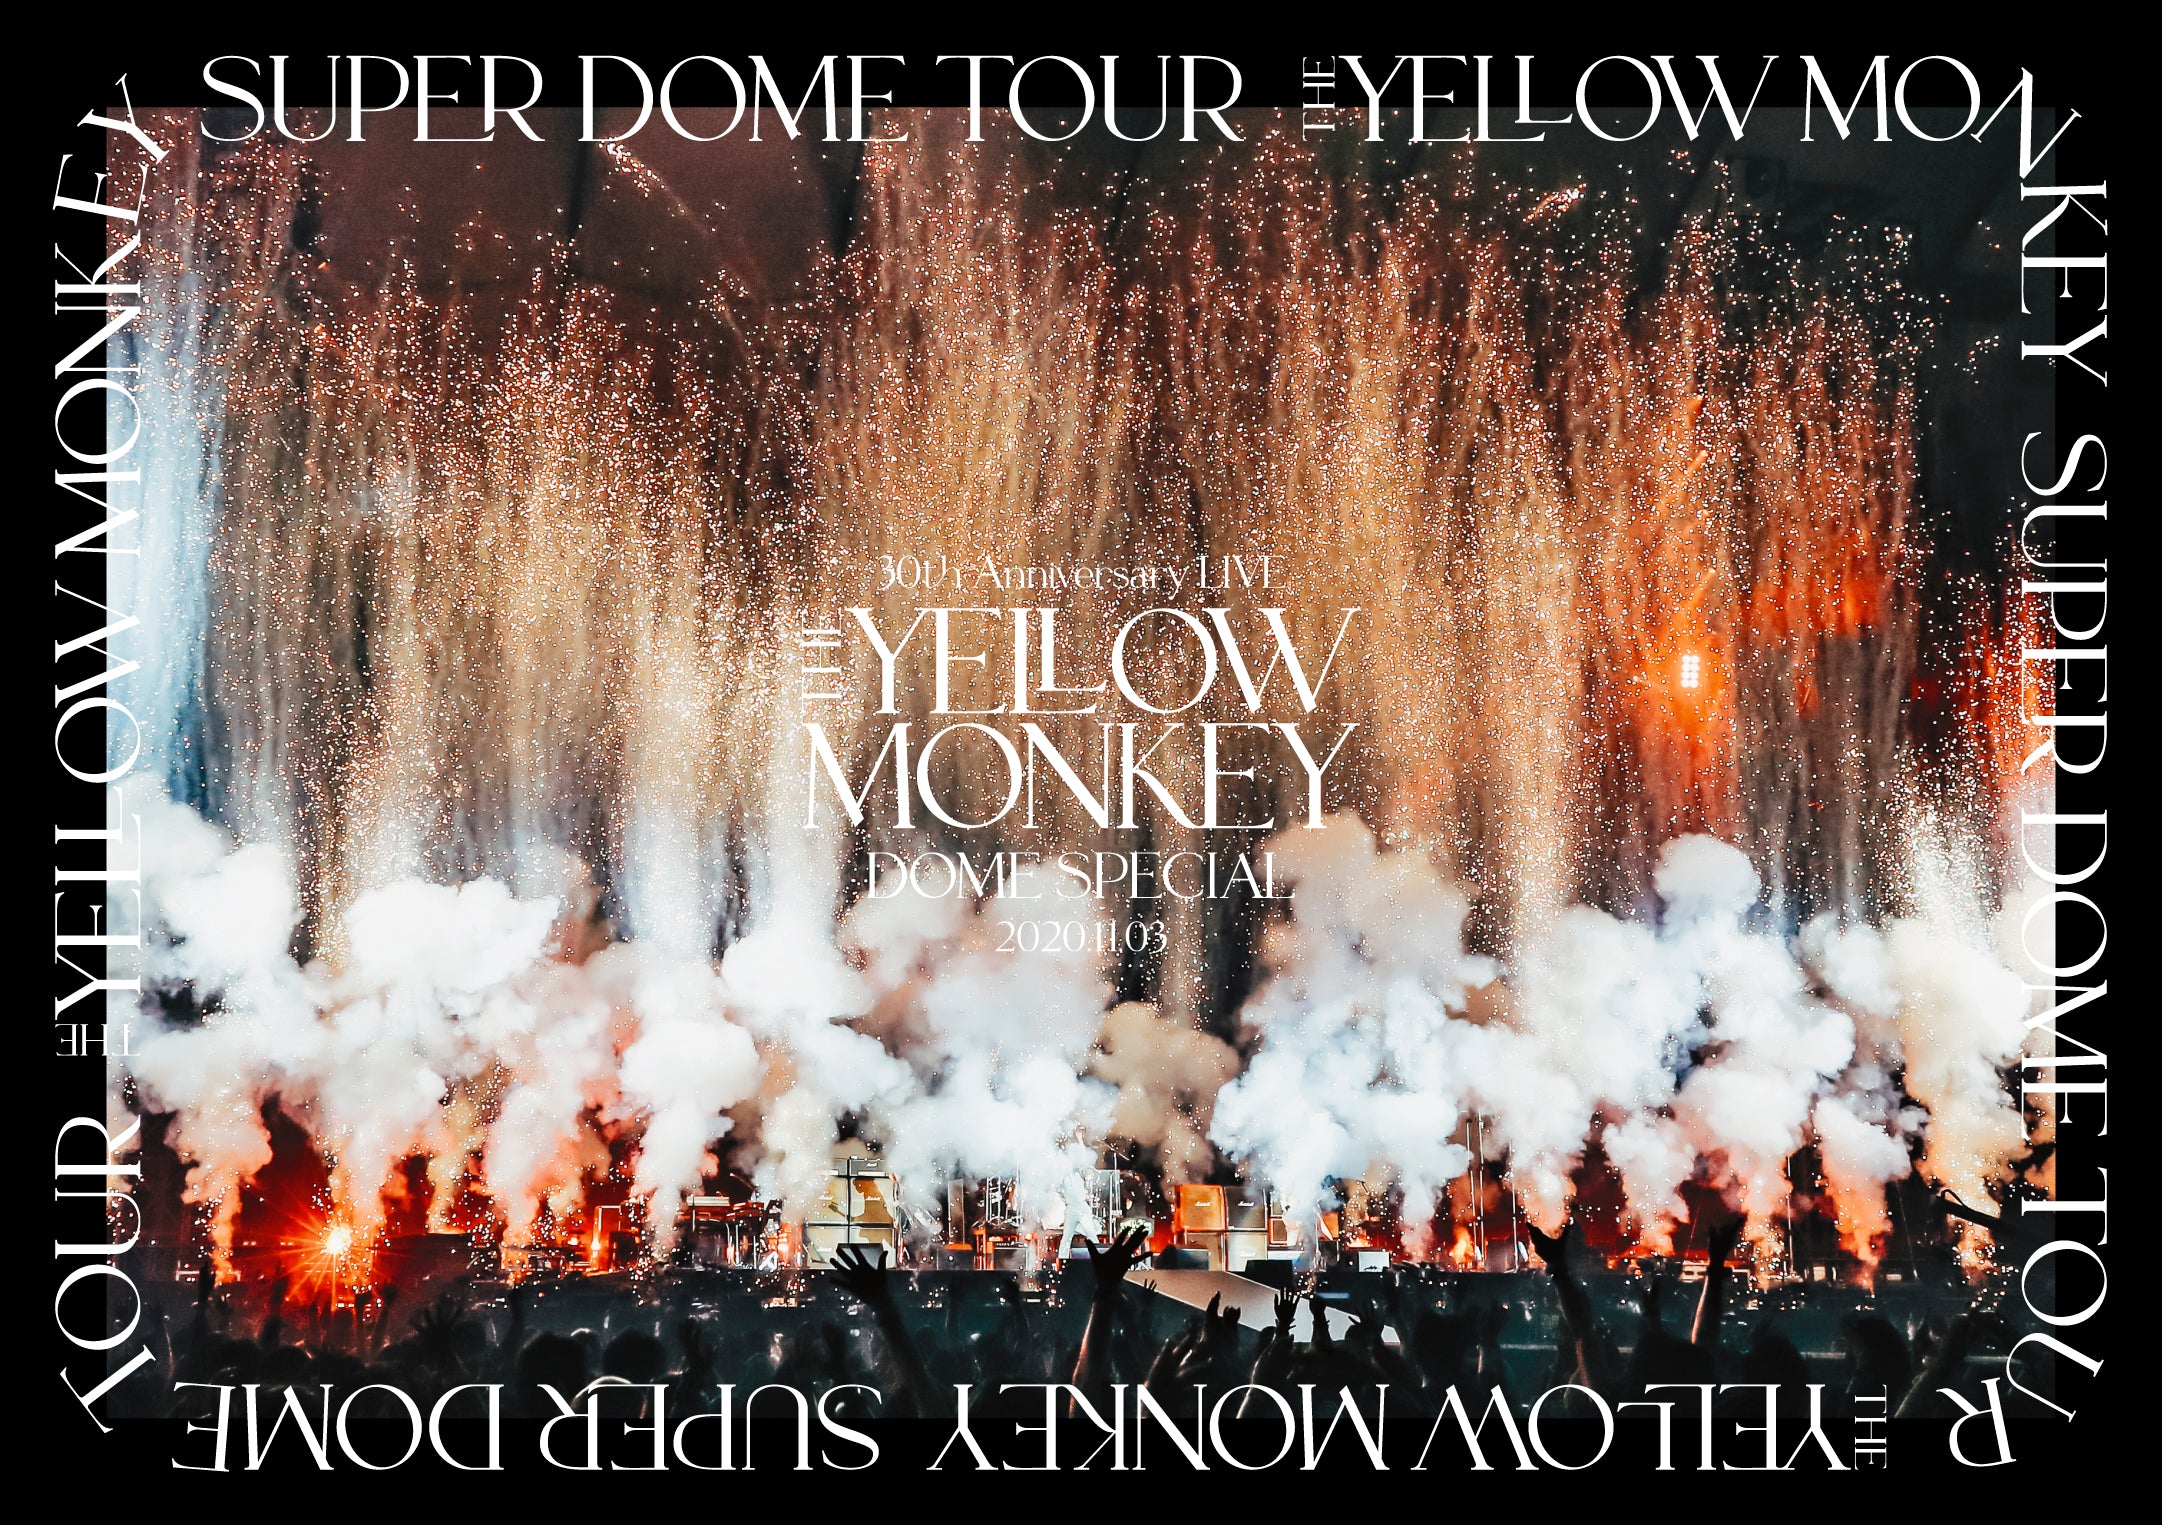 『THE YELLOW MONKEY 30th Anniversary LIVE -DOME SPECIAL- 2020.11.3』DVD